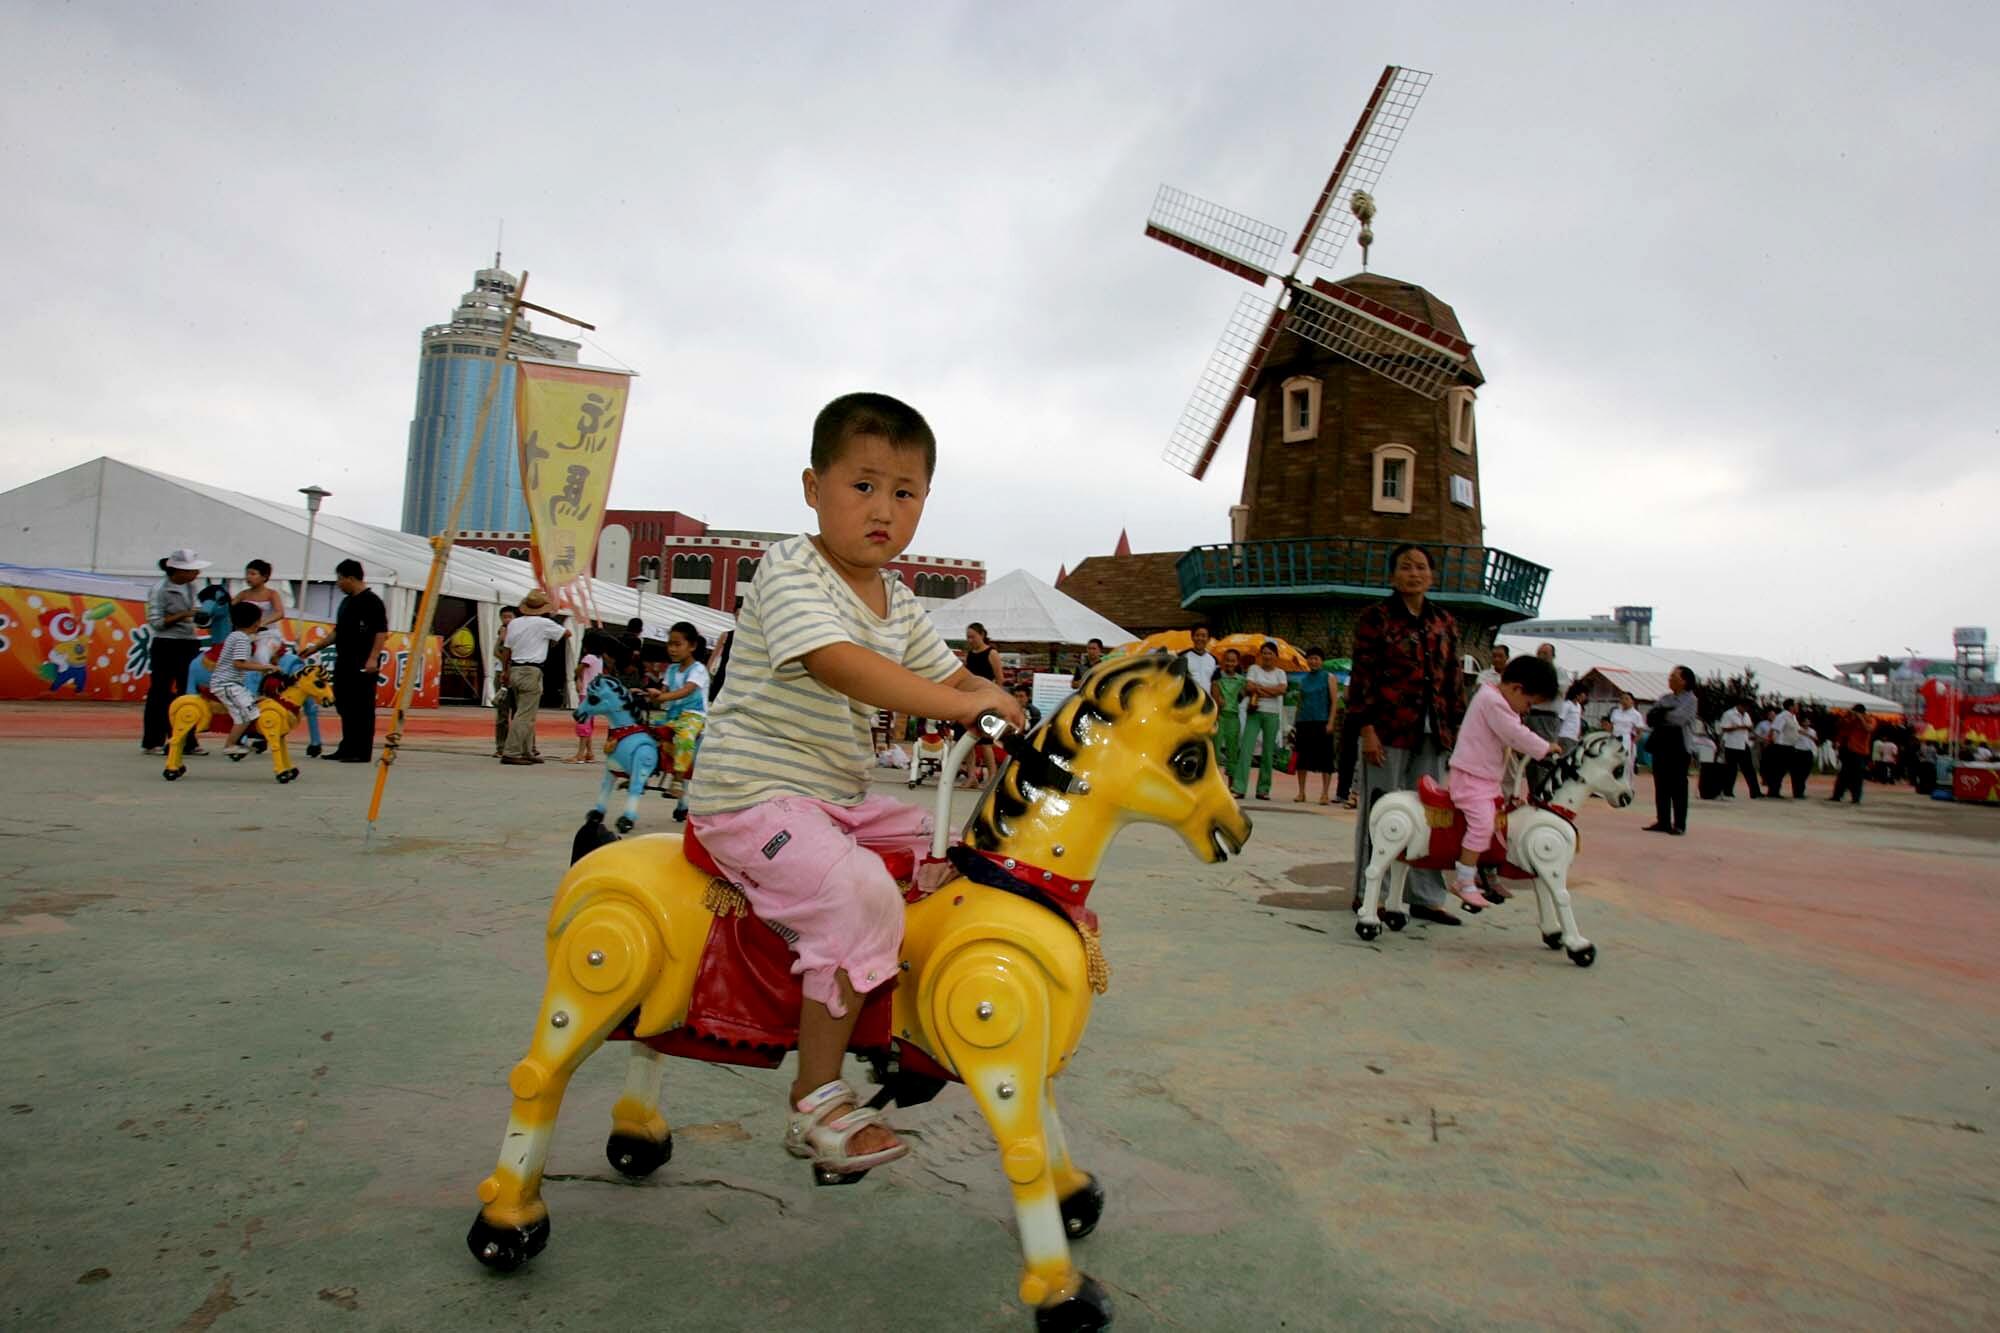 A boy rides a yellow toy pony in a park with a windmill 